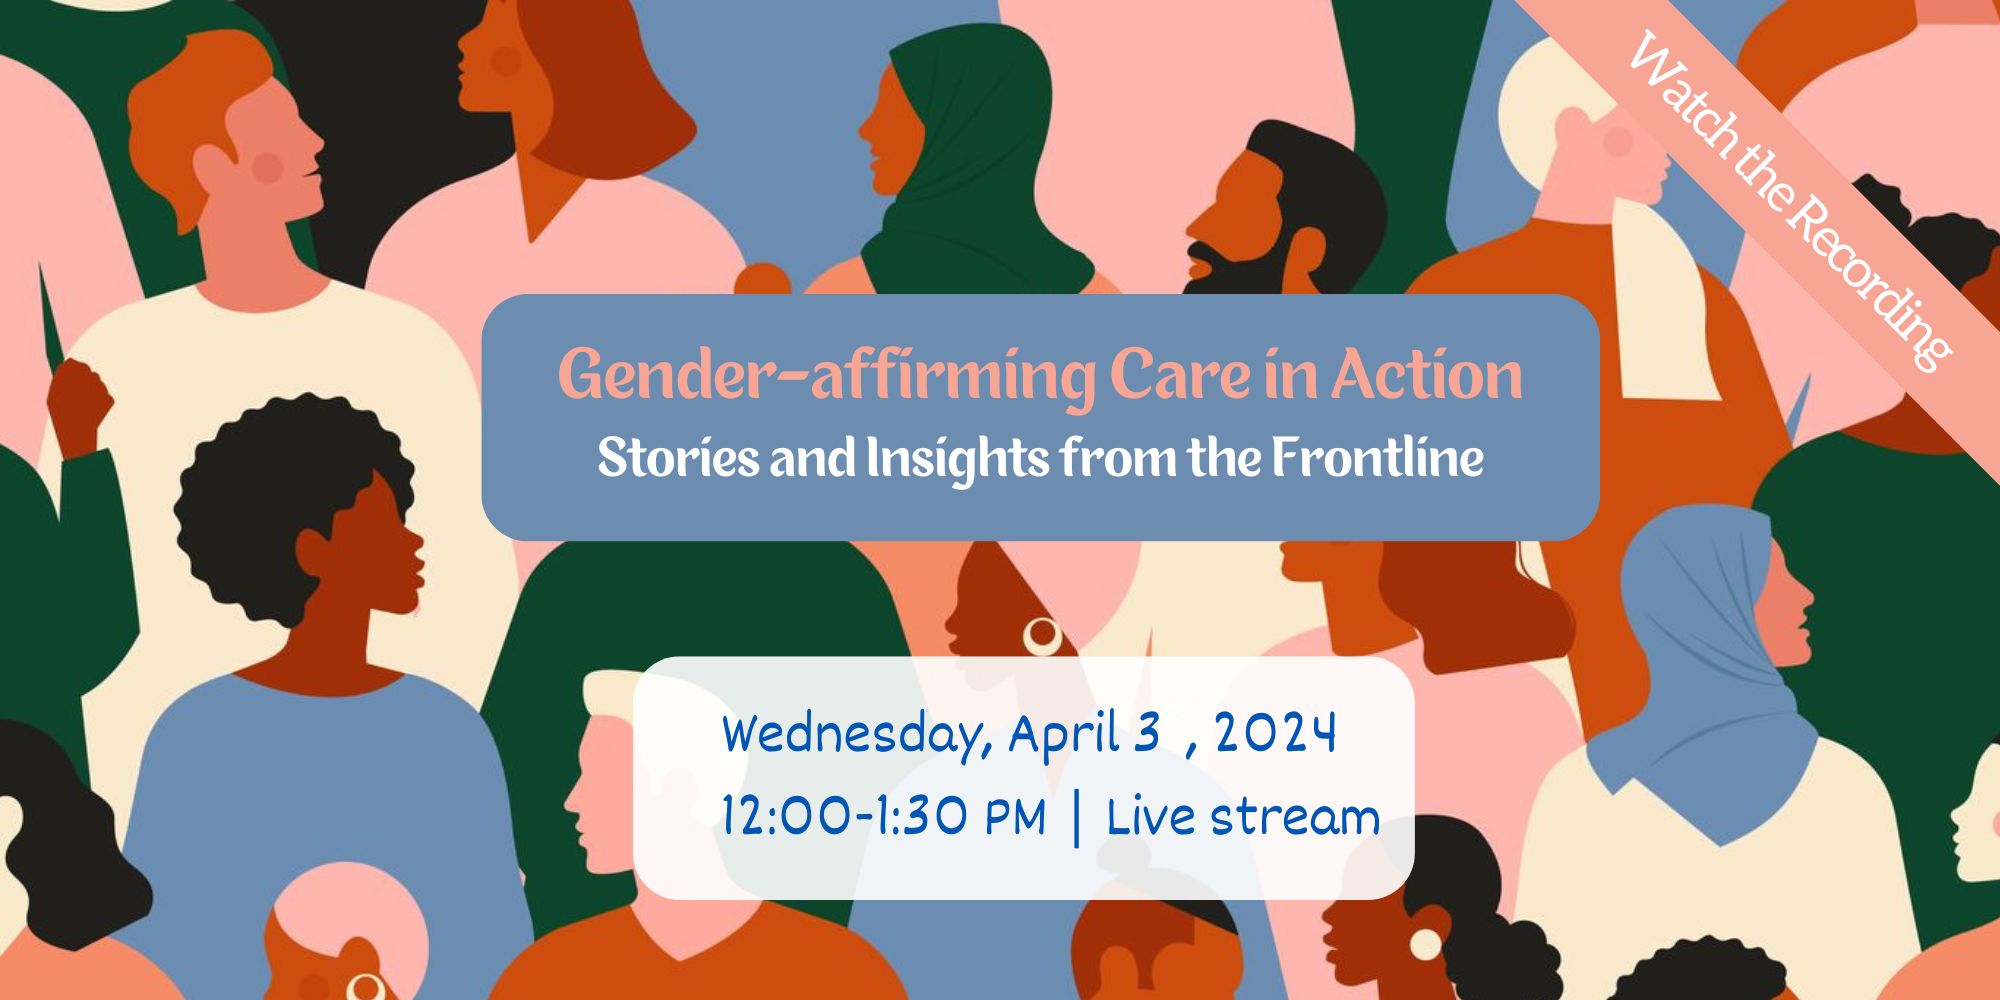 Gender-affirming Care in Action: Stories and Insights from the Frontline